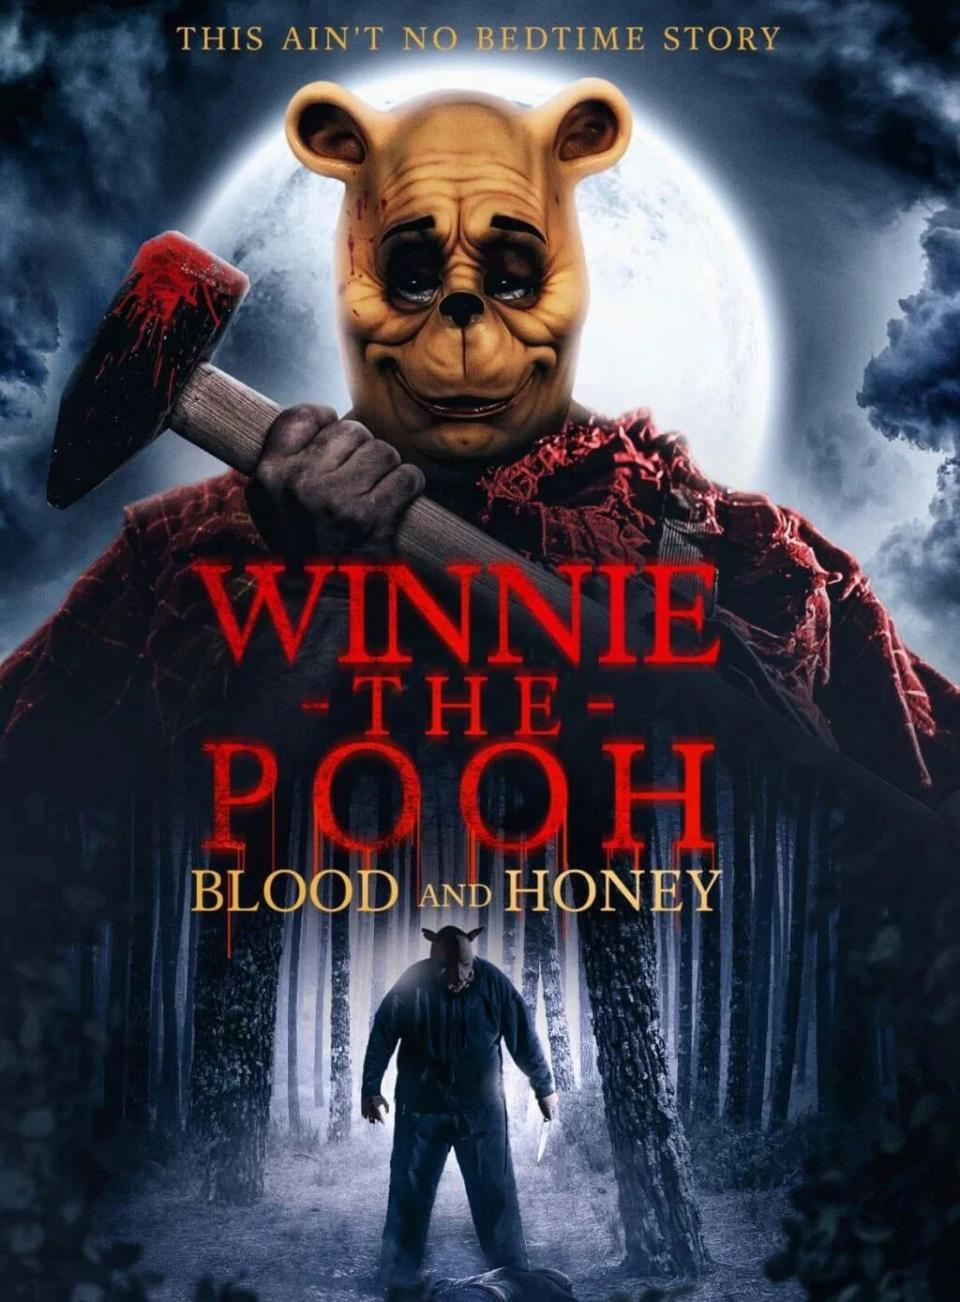 Winnie the Pooh Blood and Honey horror movie poster